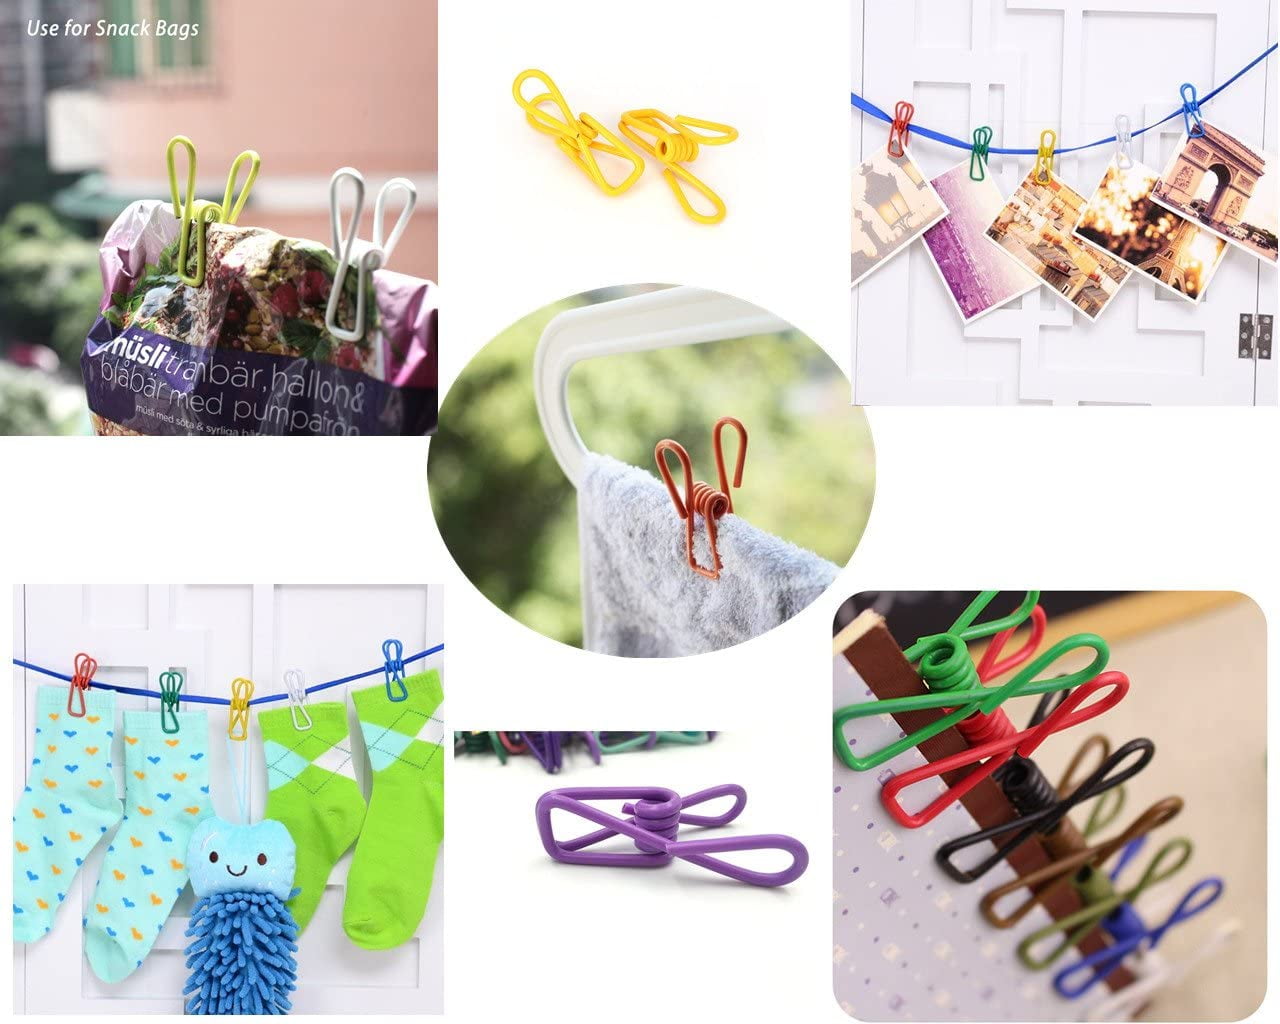 Office Bags Sealing Clip Mixed Colors Used in a Variety of Applications. Utility Clips:30pcs Mixed Colors PVC Coated Spring Clamps 2 for Chip Clips,Clothesline Clip Laundry Hanging,Gathering Clip 